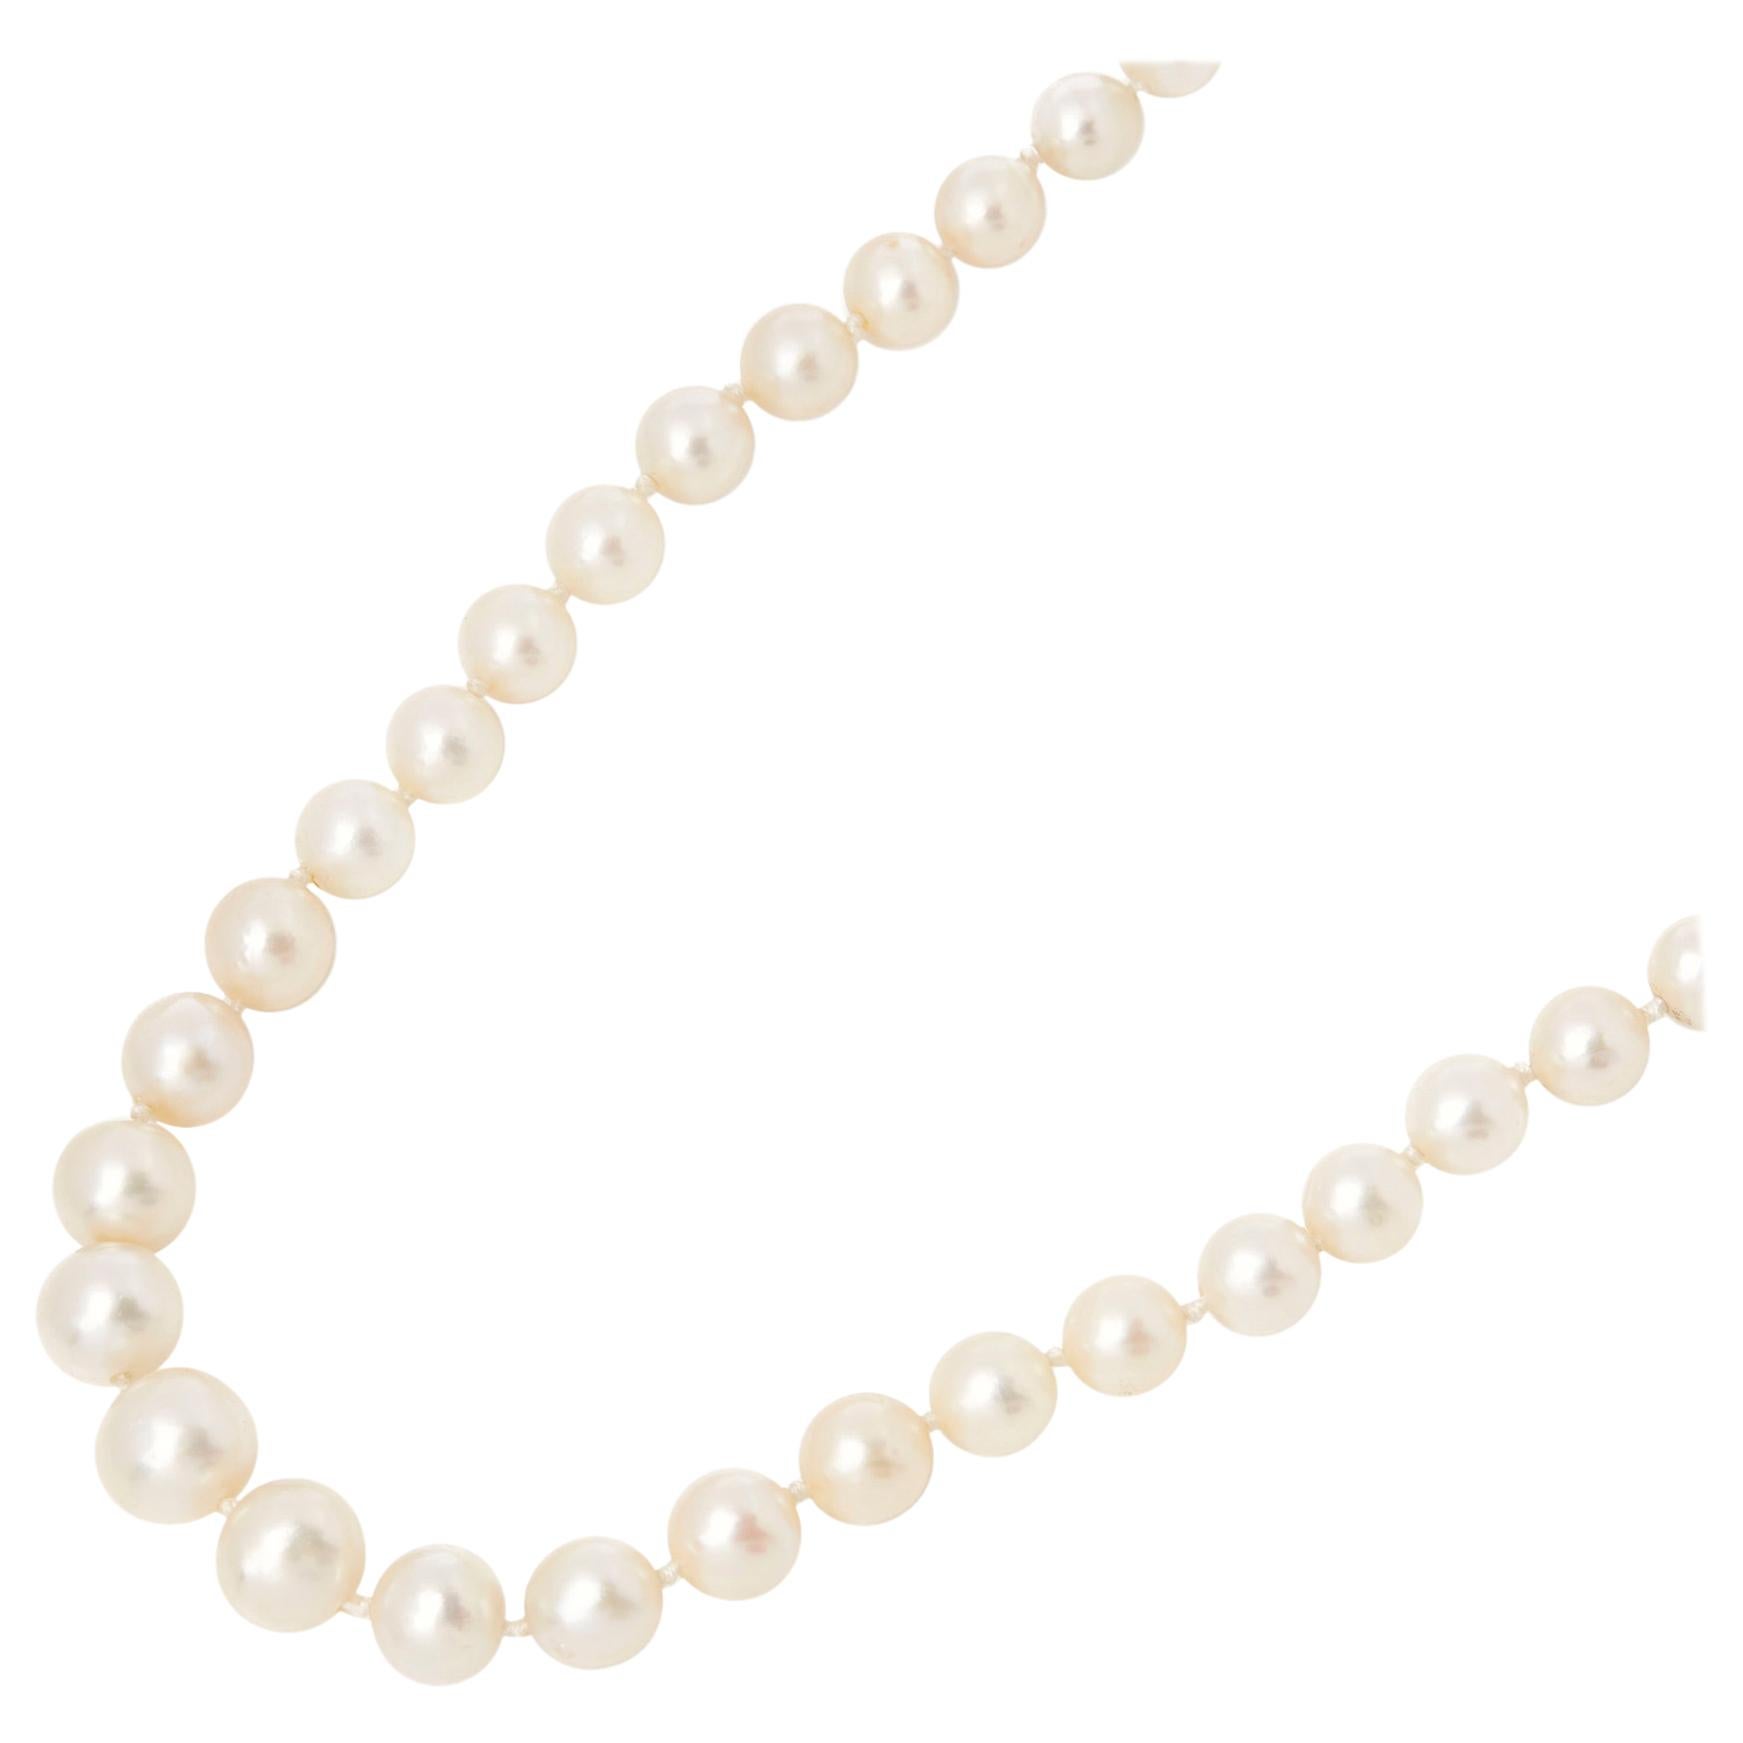 This Antique Necklace by Boucheron features Cultured Pearls and old cut Diamonds, with an 18k White Gold clasp. The Necklace has a secure push button clasp. Complete with Xupes Presentation Box.